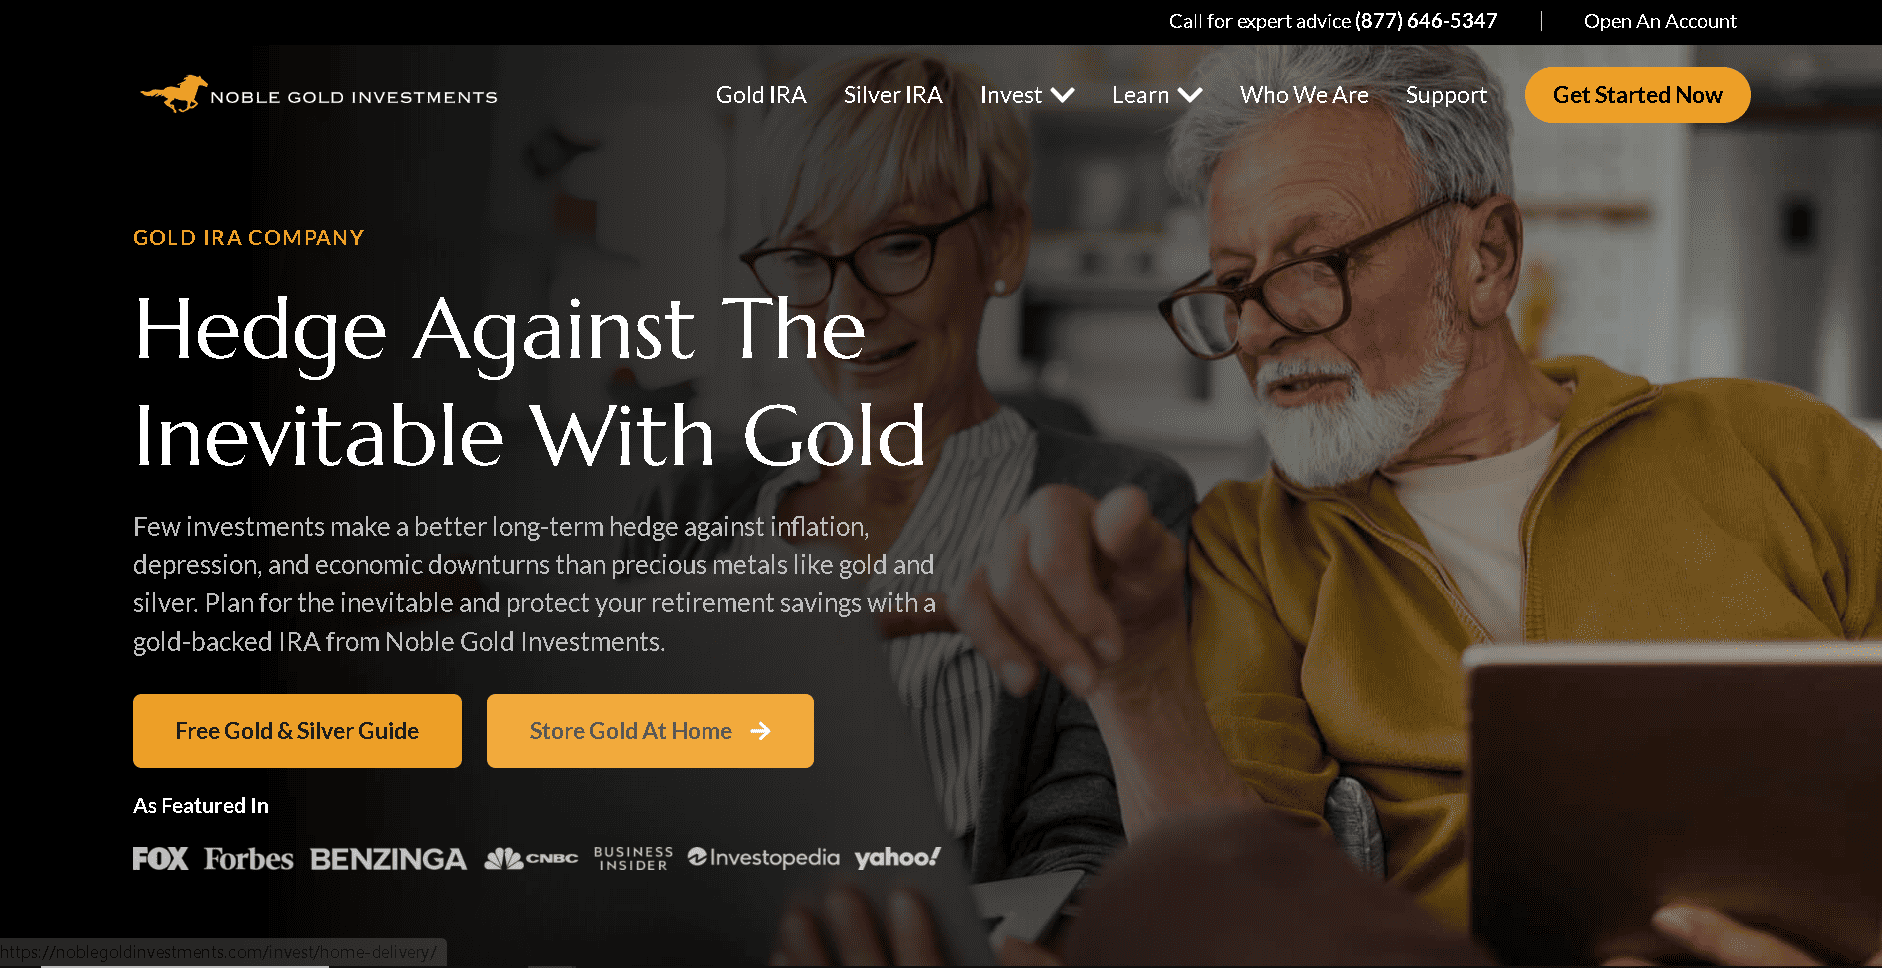 Noble Gold is a top gold and silver IRA company